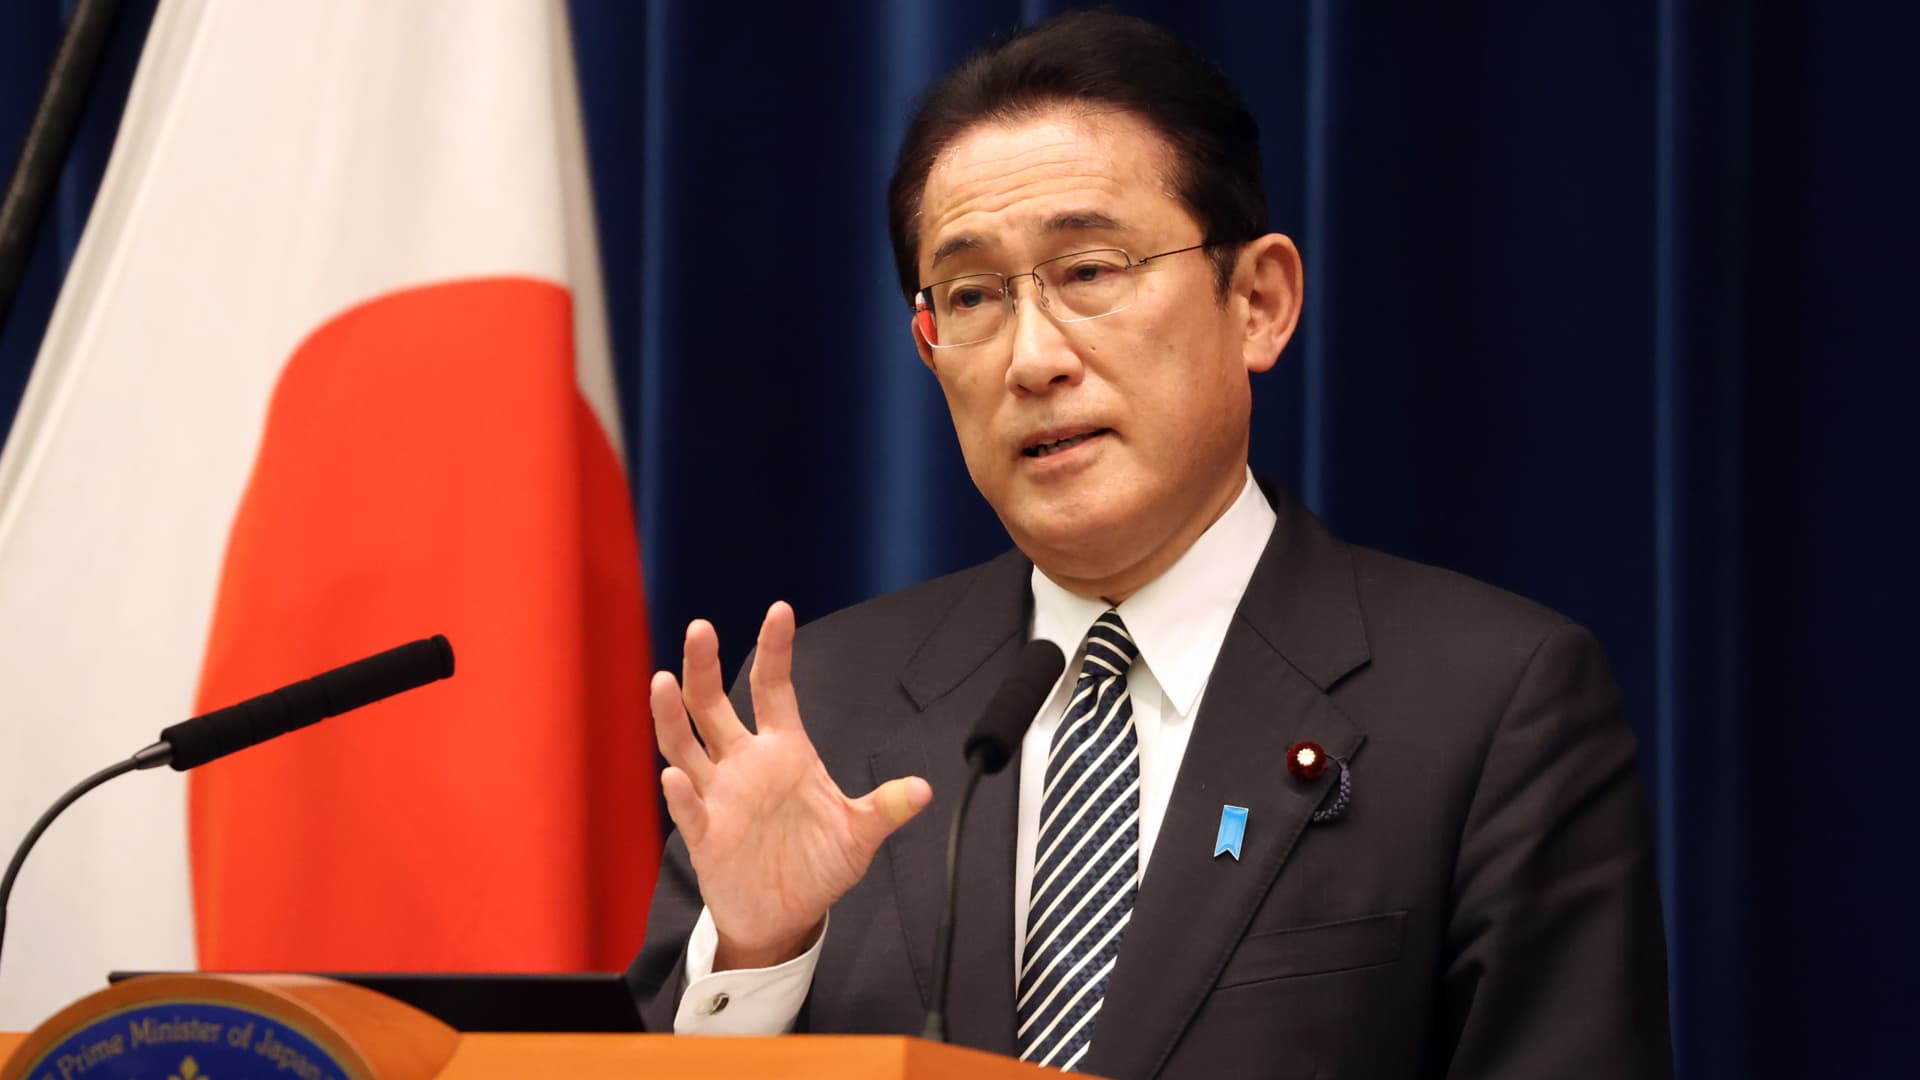 Japanese Prime Minister Fumio Kishida speaks to press members at Prime Minister's official residence in Tokyo, Japan after a session on December 21, 2021.